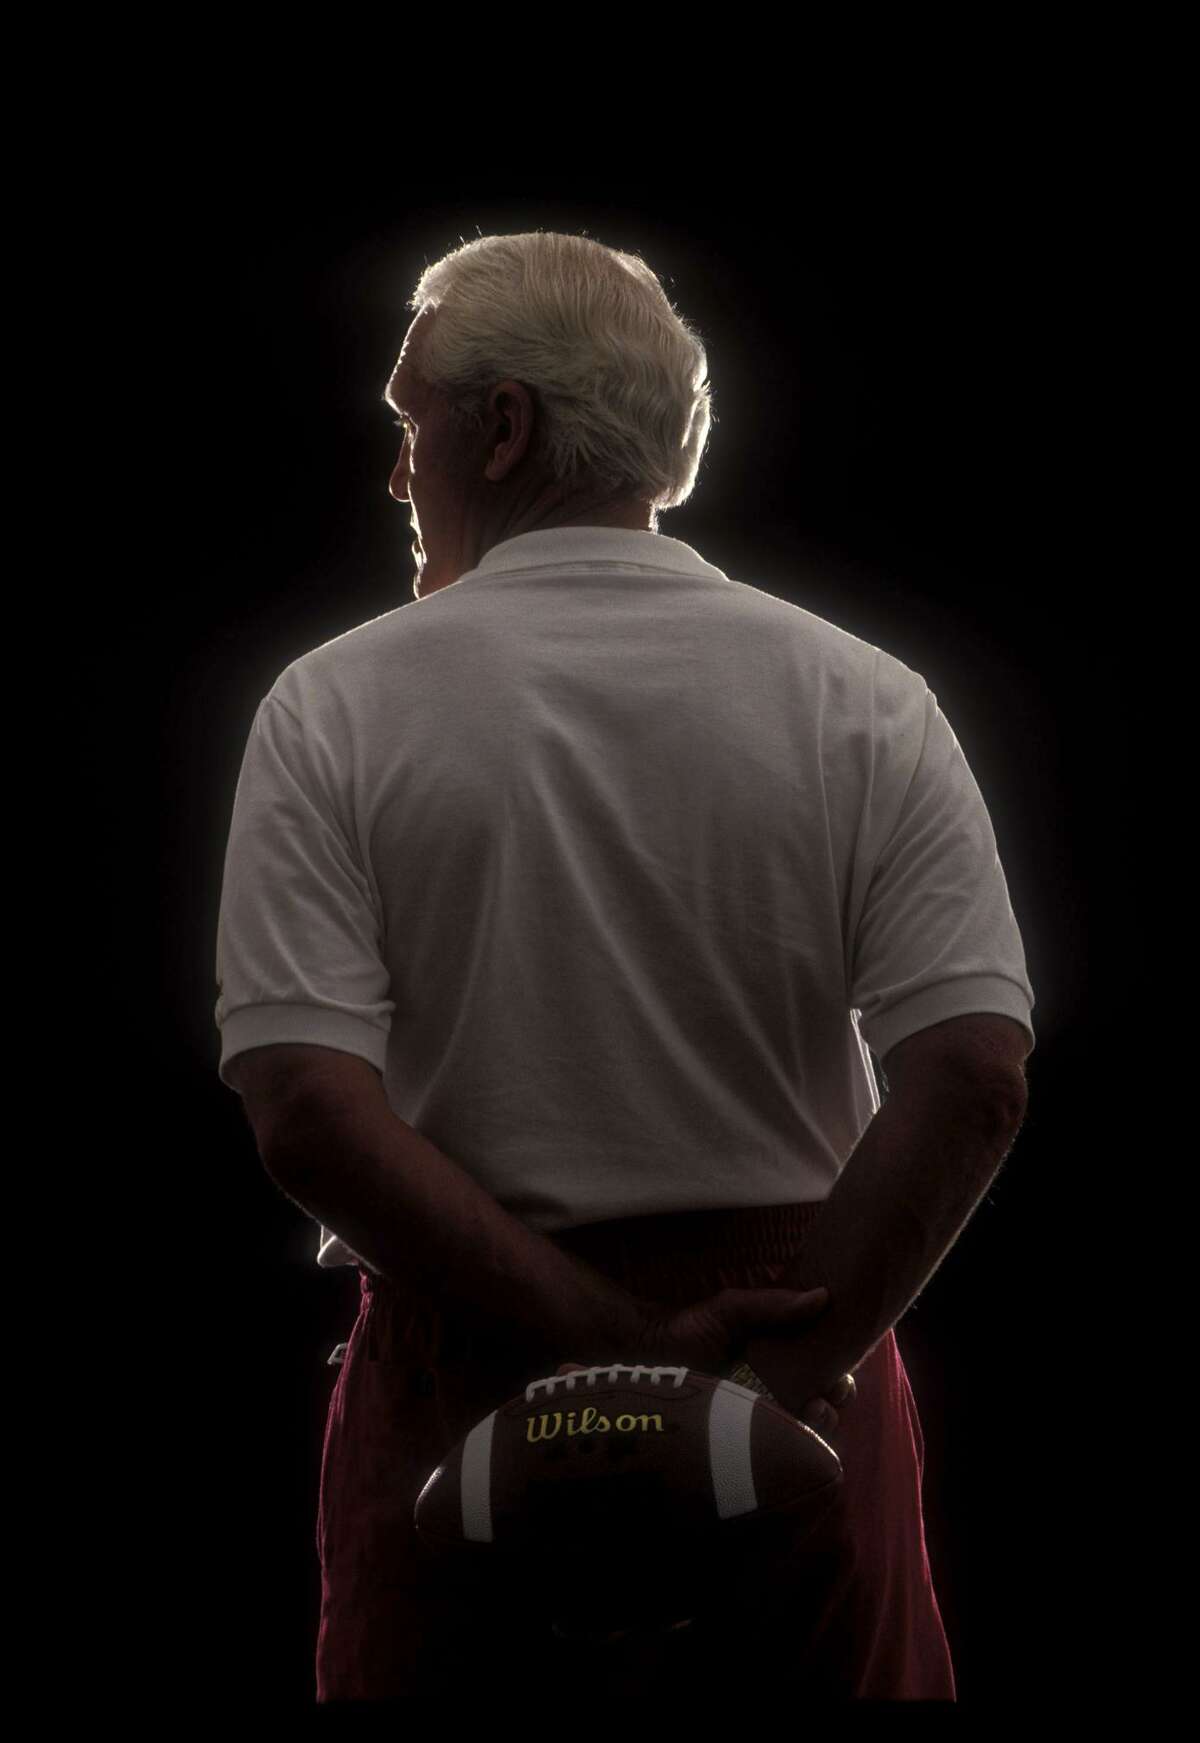 Bill Walsh, the inventor of the West Coast Offense. Walsh, guided the San Francisco 49ers to three Super Bowl championships and six NFC West division titles in his 10 years as head coach.